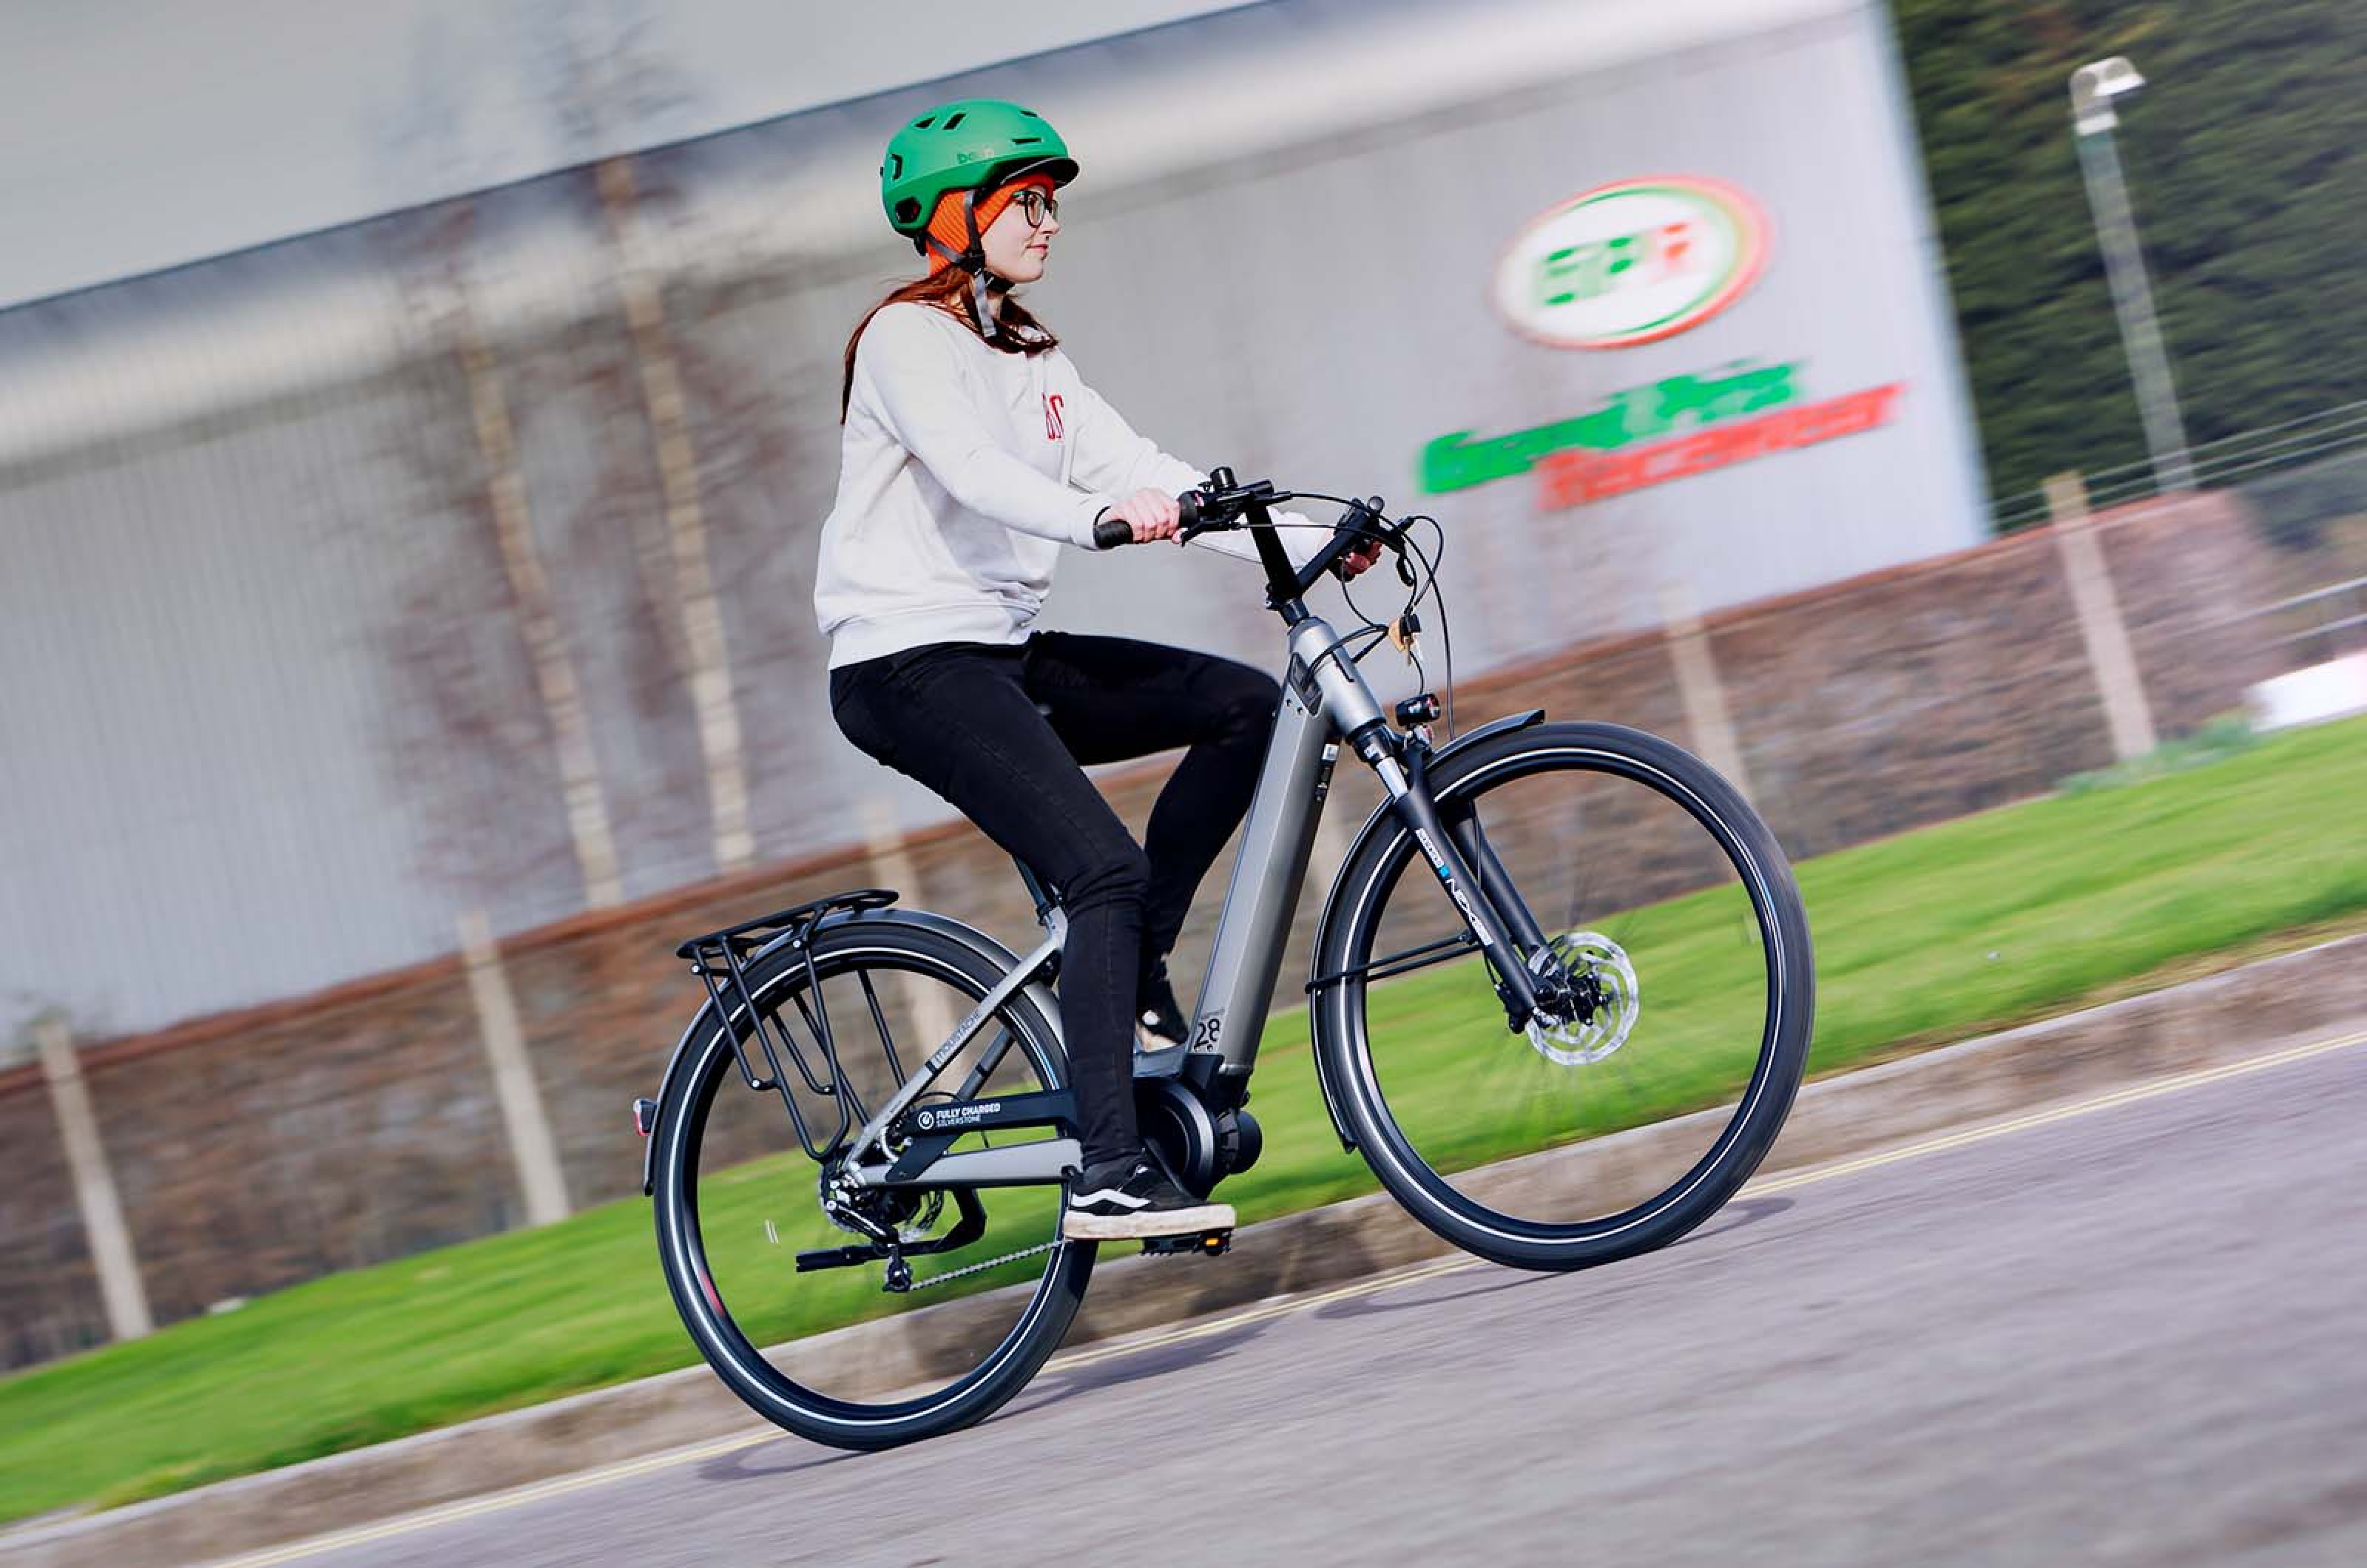 From practical cargo machines, to trail-ready mountain bikes, electric two-wheelers have become popular alternatives to both cars and motorcycles.